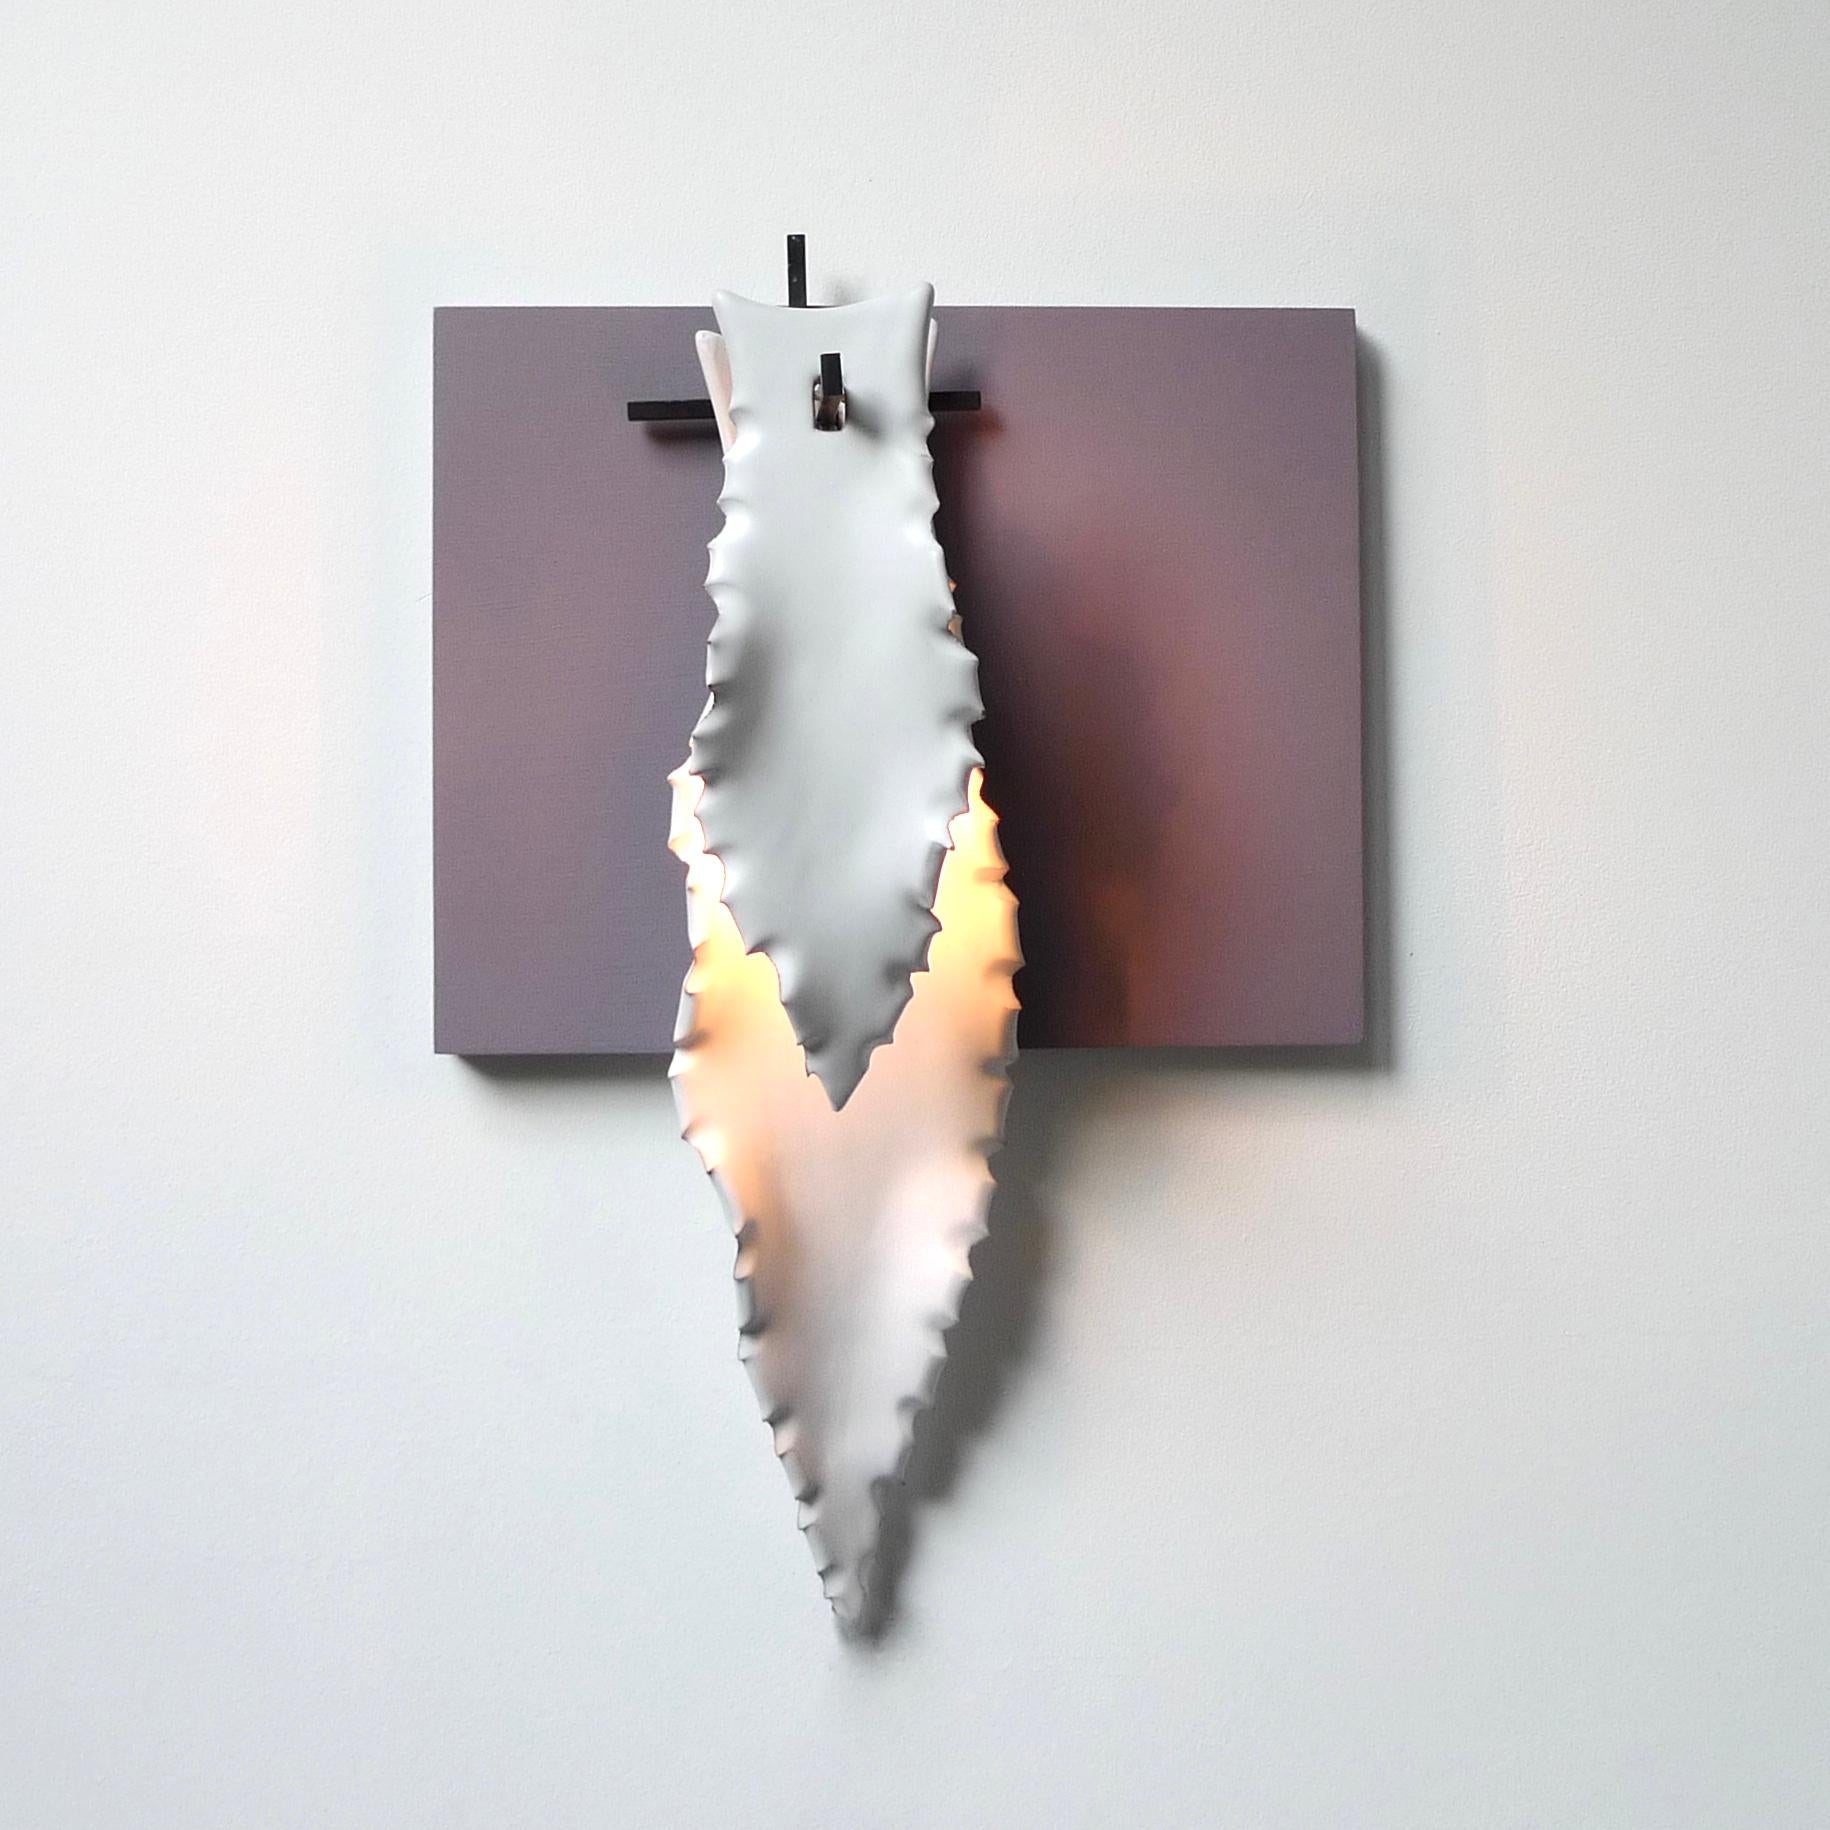 2 Agave Leafs wall light by Sander Bottinga
Dimensions: H 54 x W 12 x D 13 cm
Materials: Ceramic, forged iron

Handmade matt white Agave leaves in ceramics from the famous ceramic village Grottaglie / Puglia in the south of Italy.
Base in forged